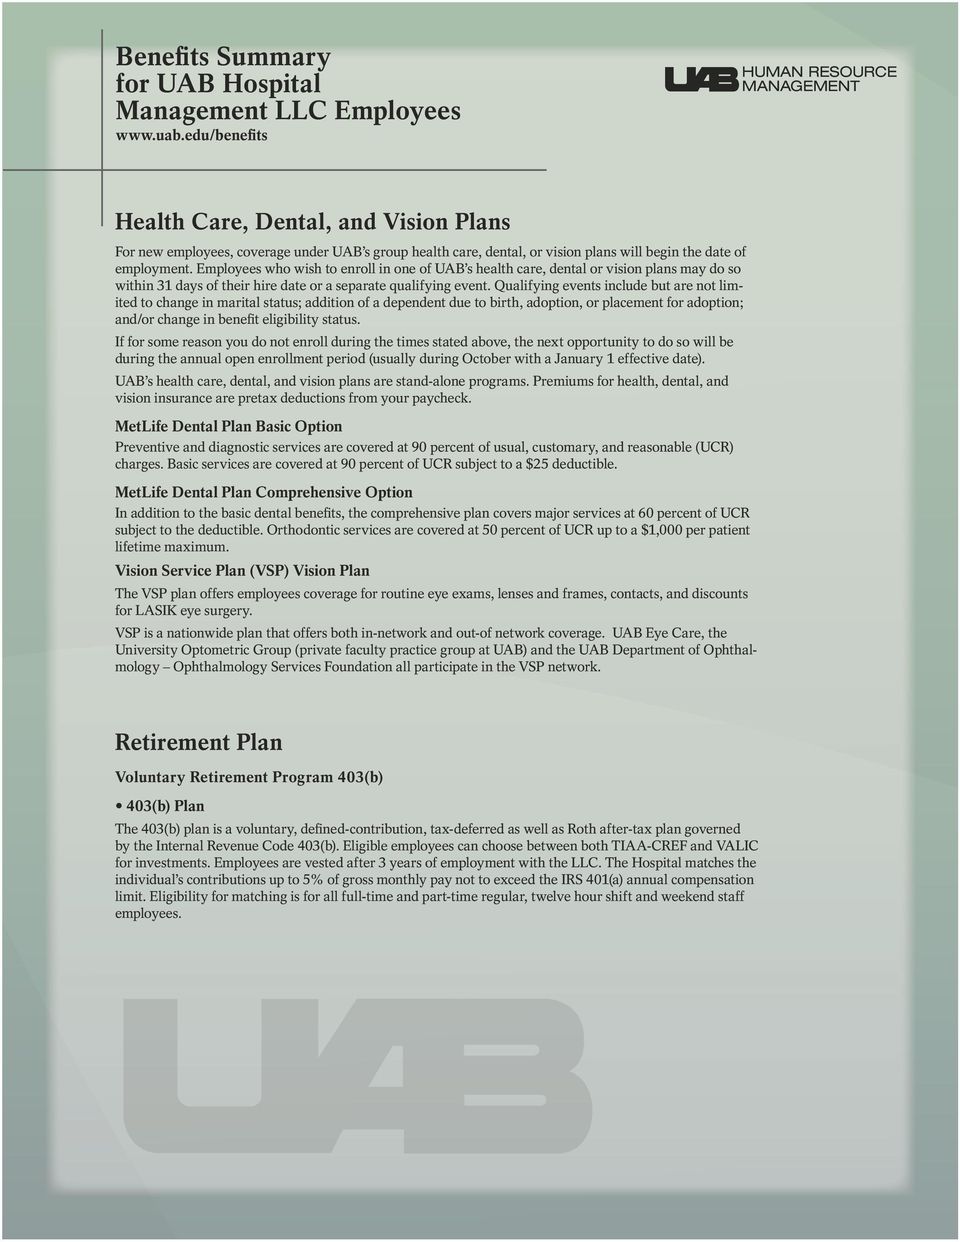 who wish to enroll in one of UAB s health care, dental or vision plans may do so within 31 days of their hire date or a separate qualifying event.